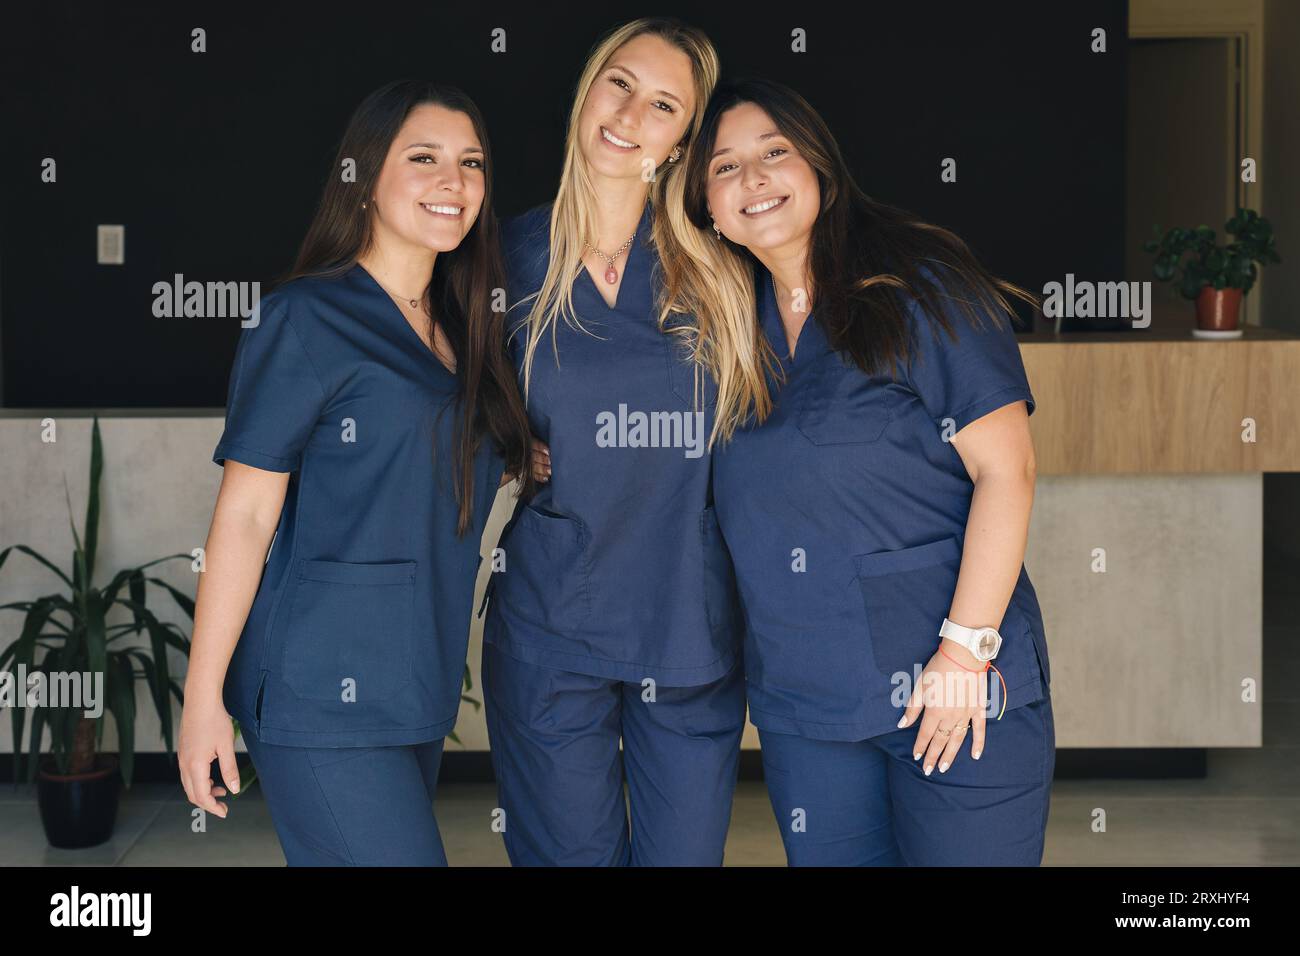 Concept of medicine, women working in a team. Beautiful smiling female health care workers looking at the camera. Stock Photo